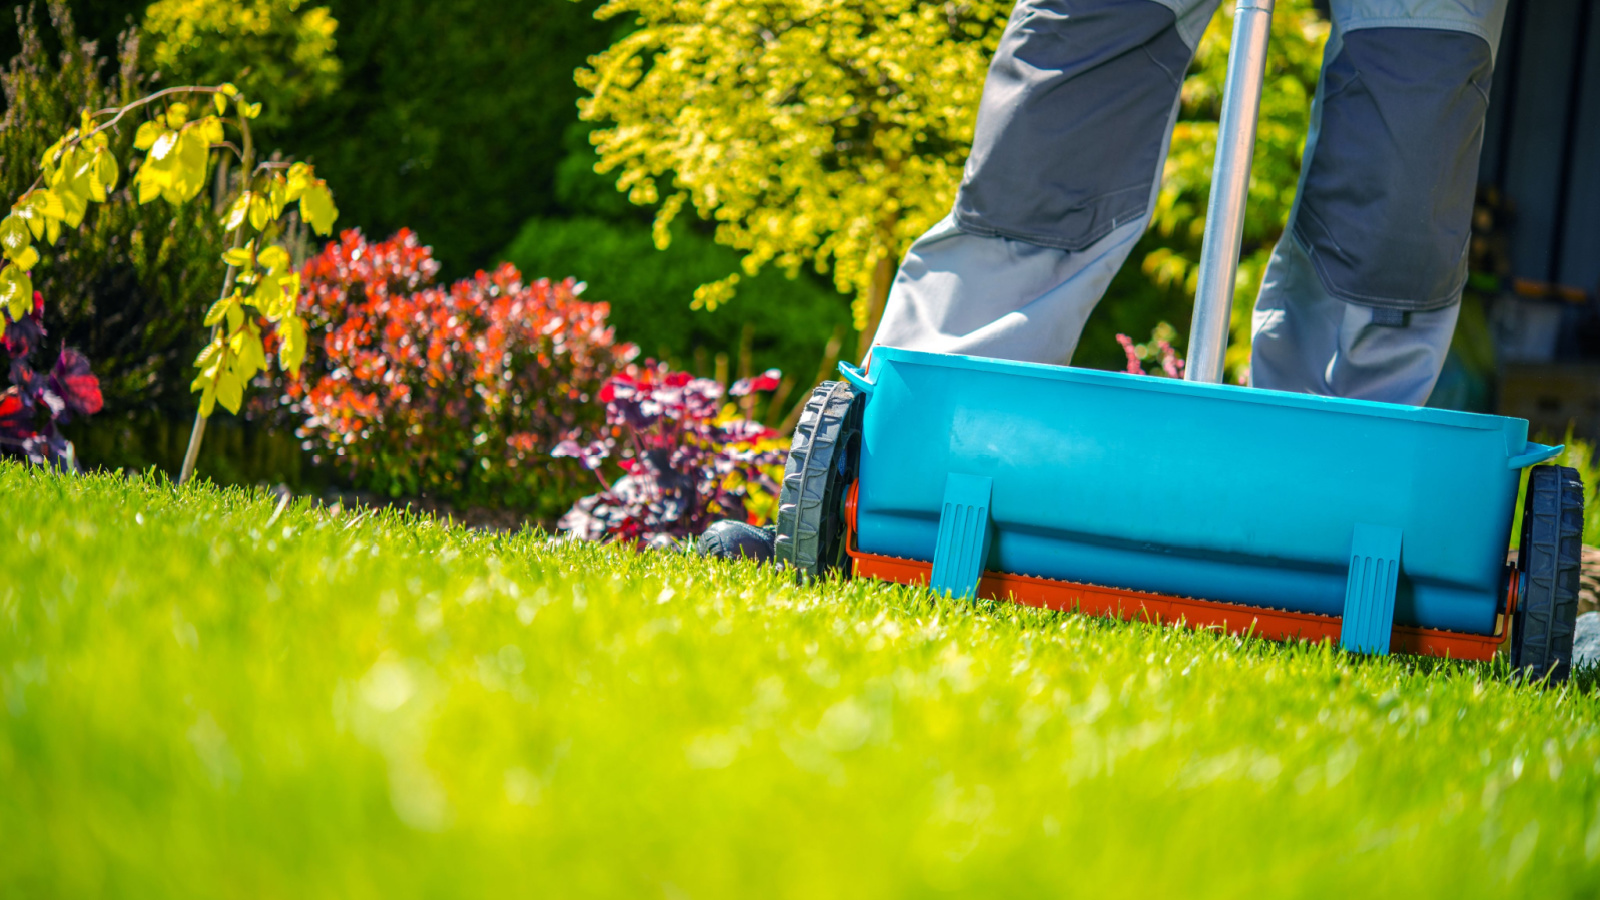 Lawn Fertilizer Service Near Me Manchester, MO | Manchester, MO Lawn Care | Lawn Sprinklers of St. Louis